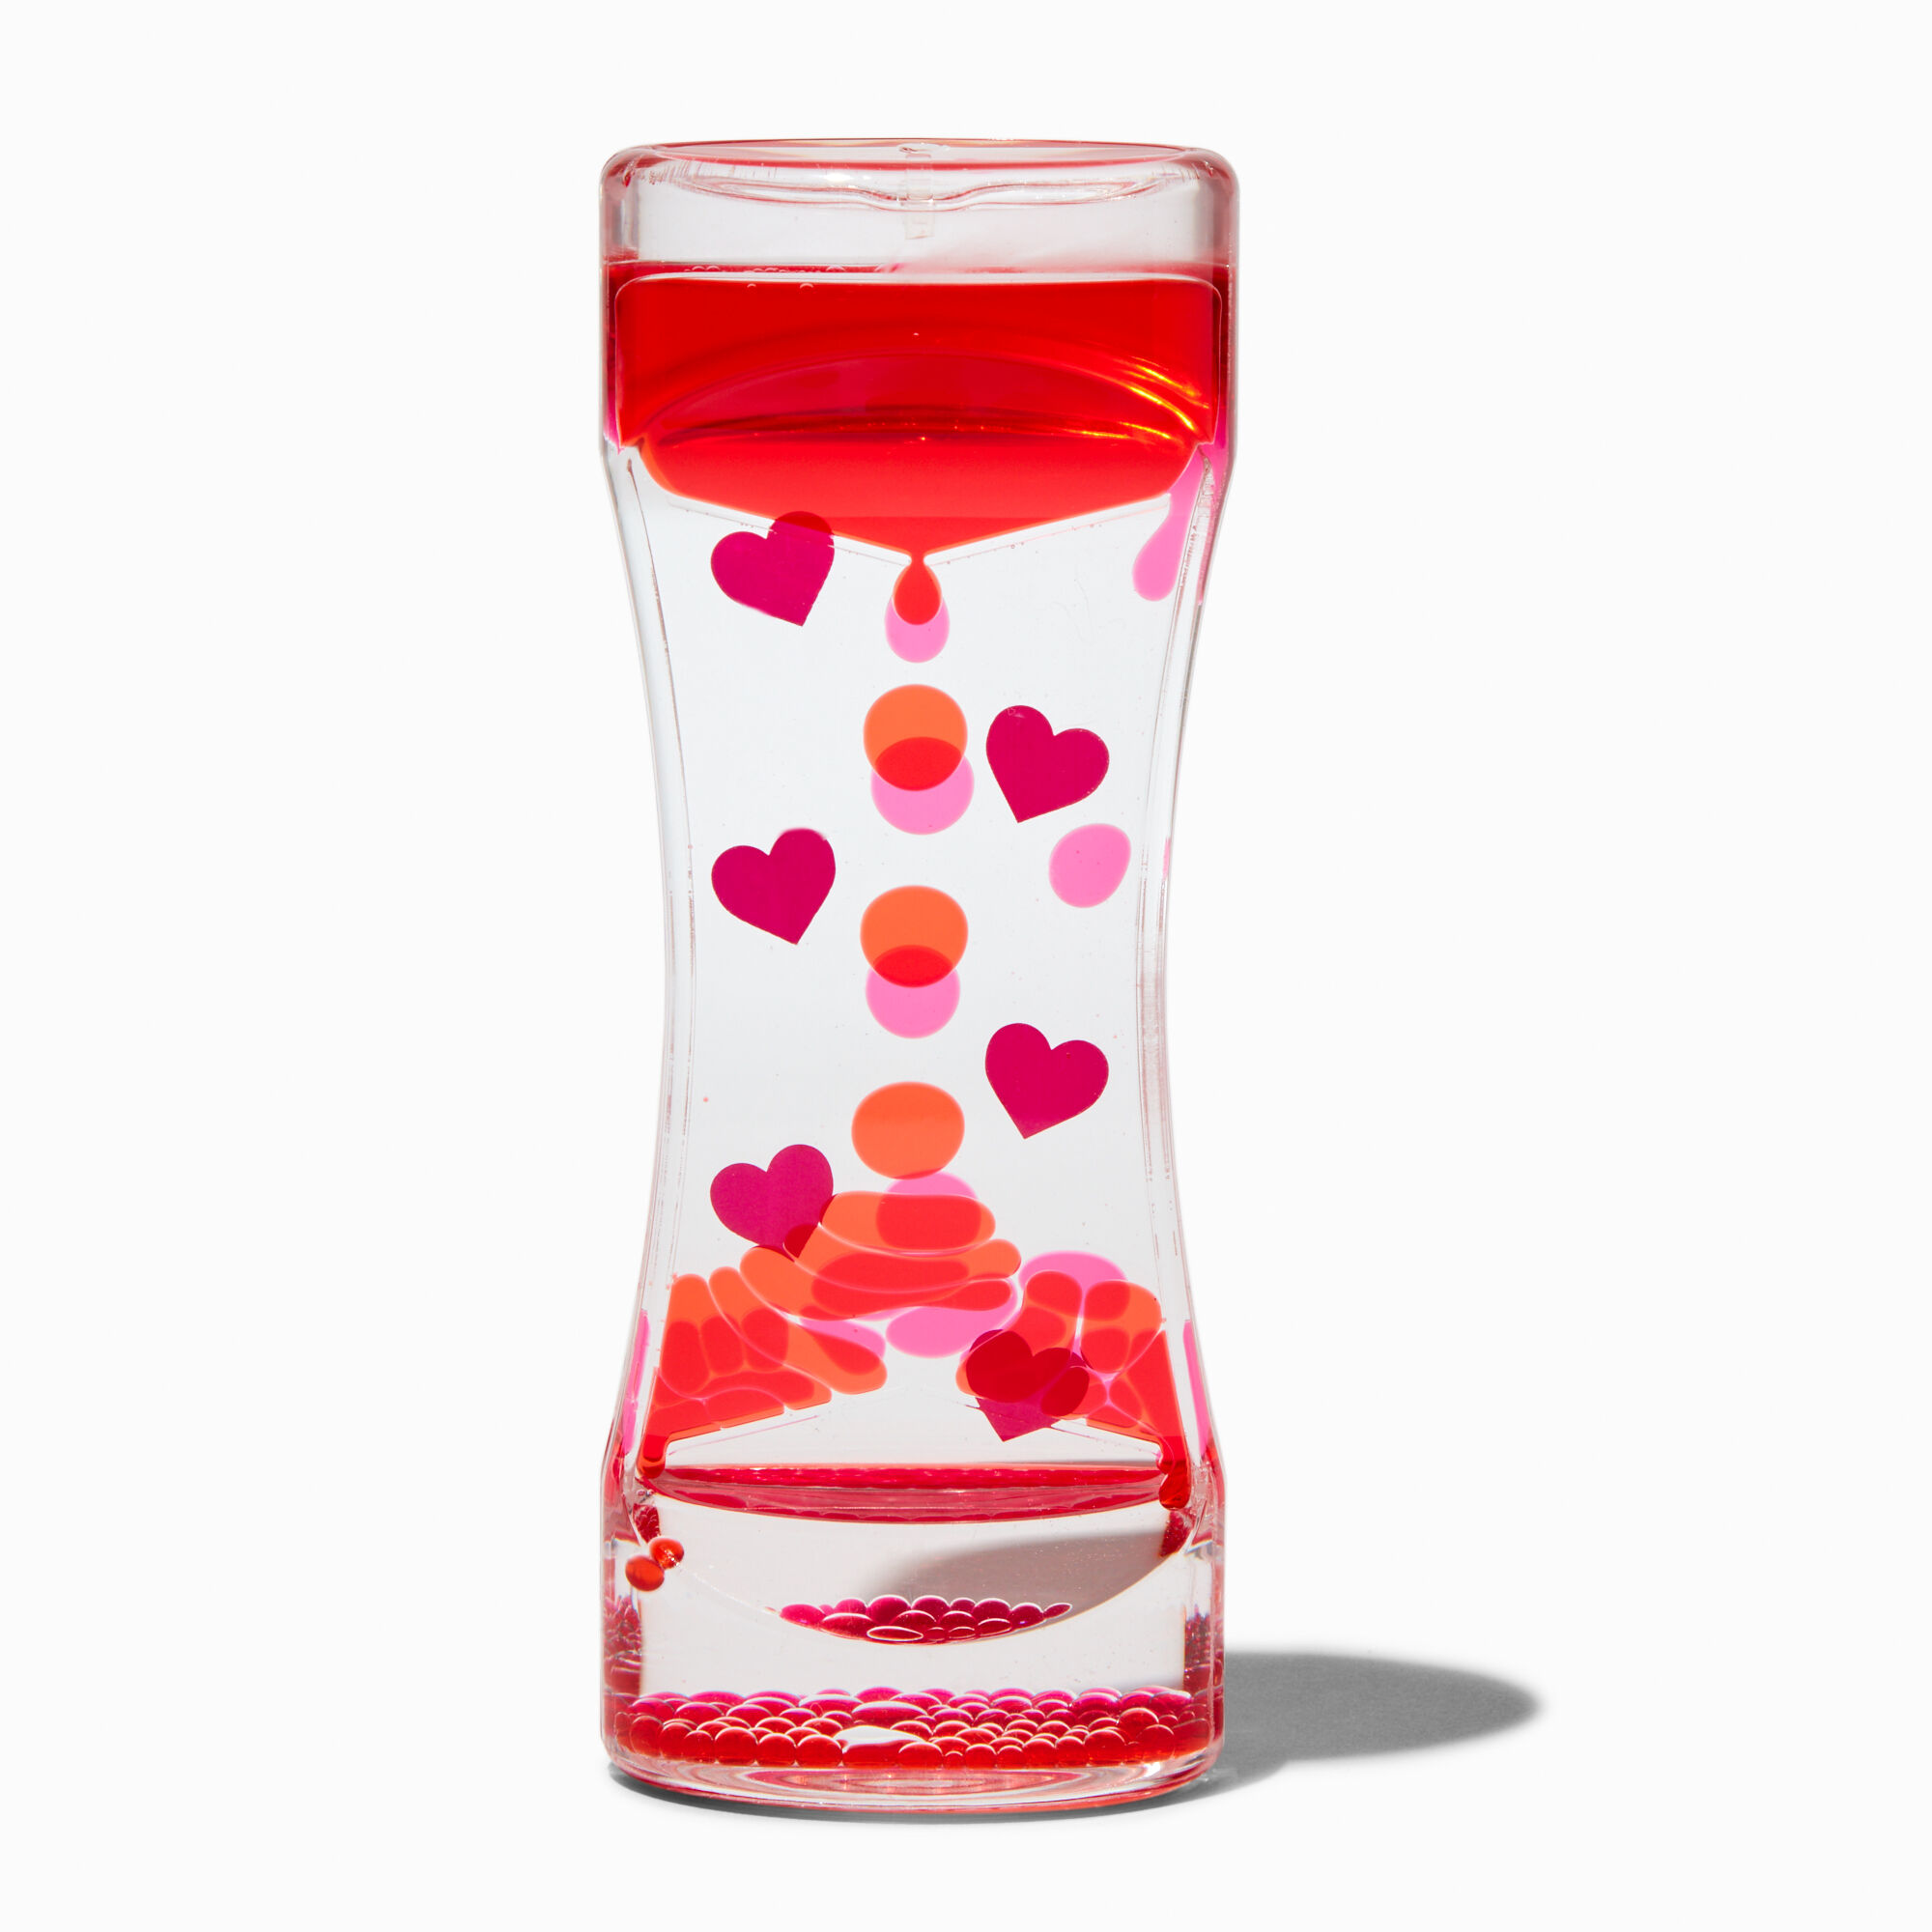 View Claires Heart WaterFilled Decor Bubbler Pink information